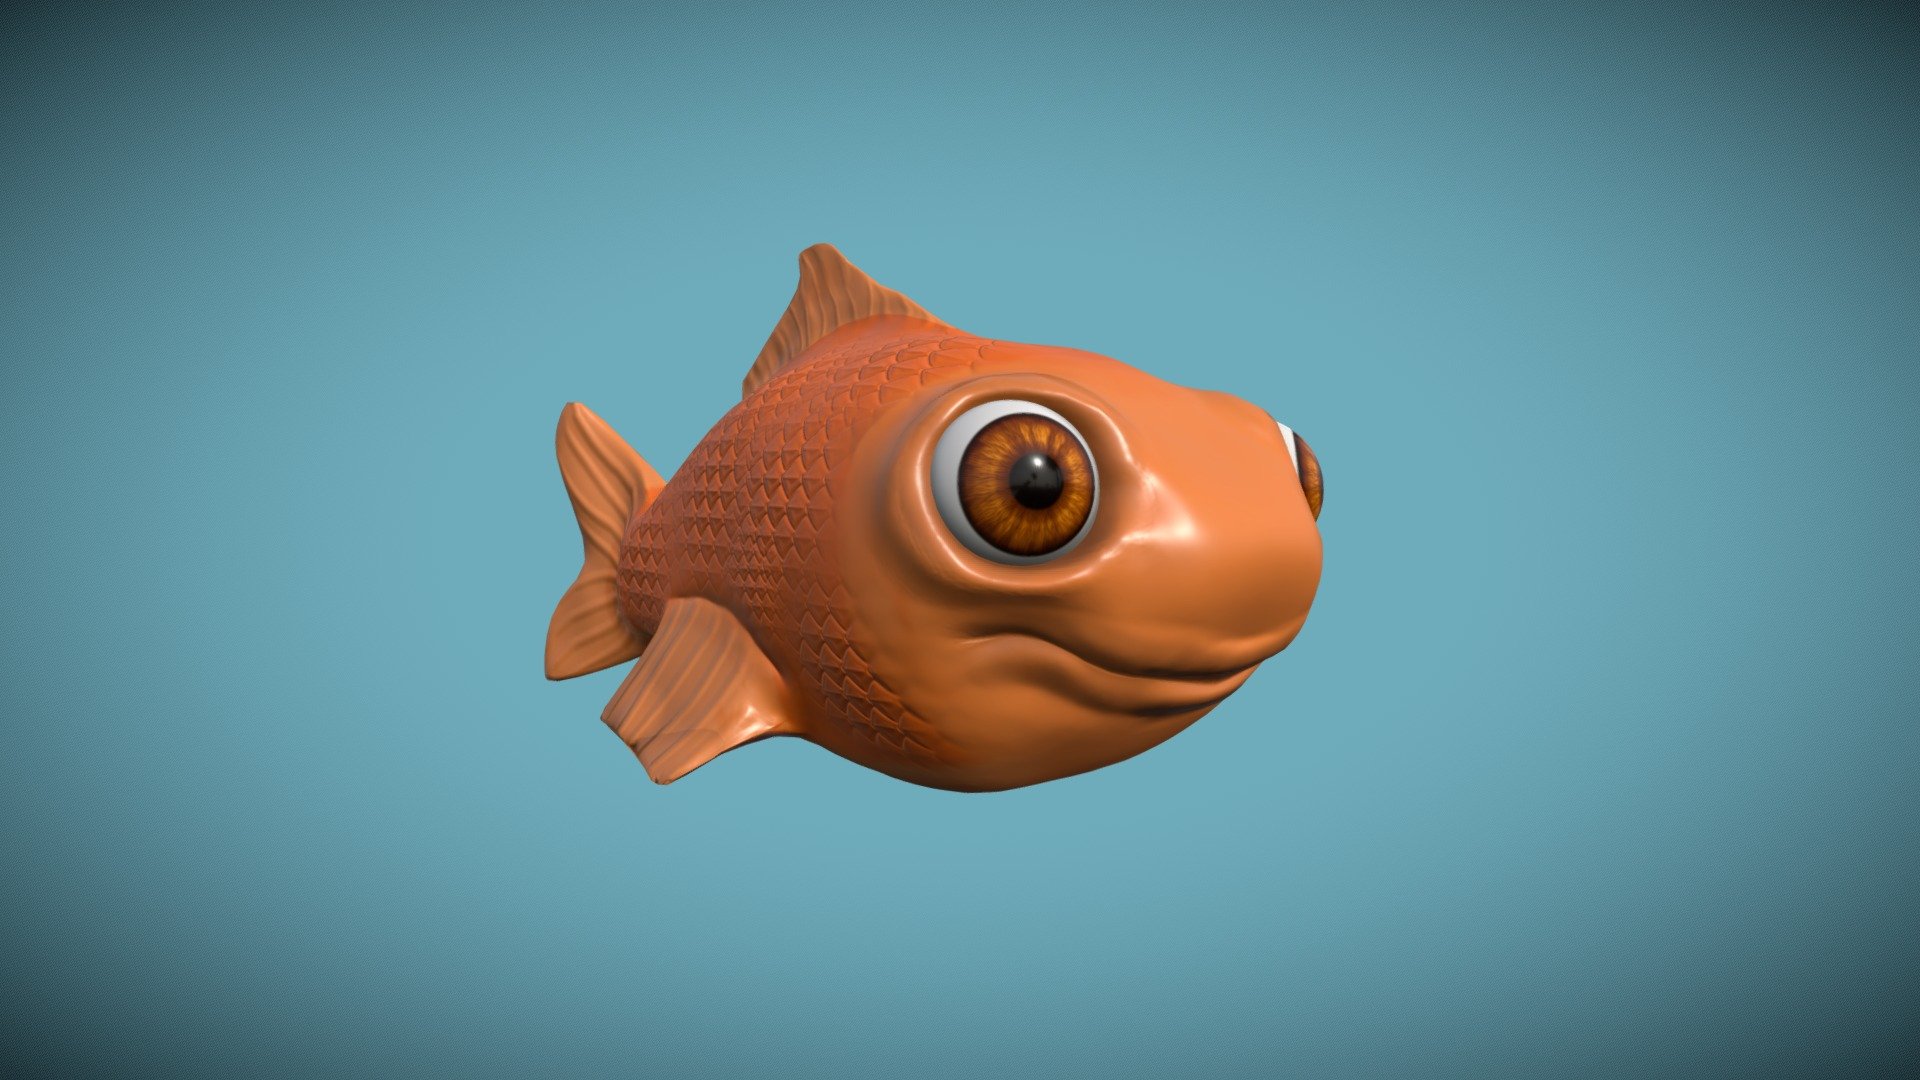 Made in Blender following a course by Alex Cordebard. Link to course: https://www.udemy.com/course/blender-3d-sculpting-course/ - Cartoon Fish - Download Free 3D model by Jon3D (@JonRS) 3d model